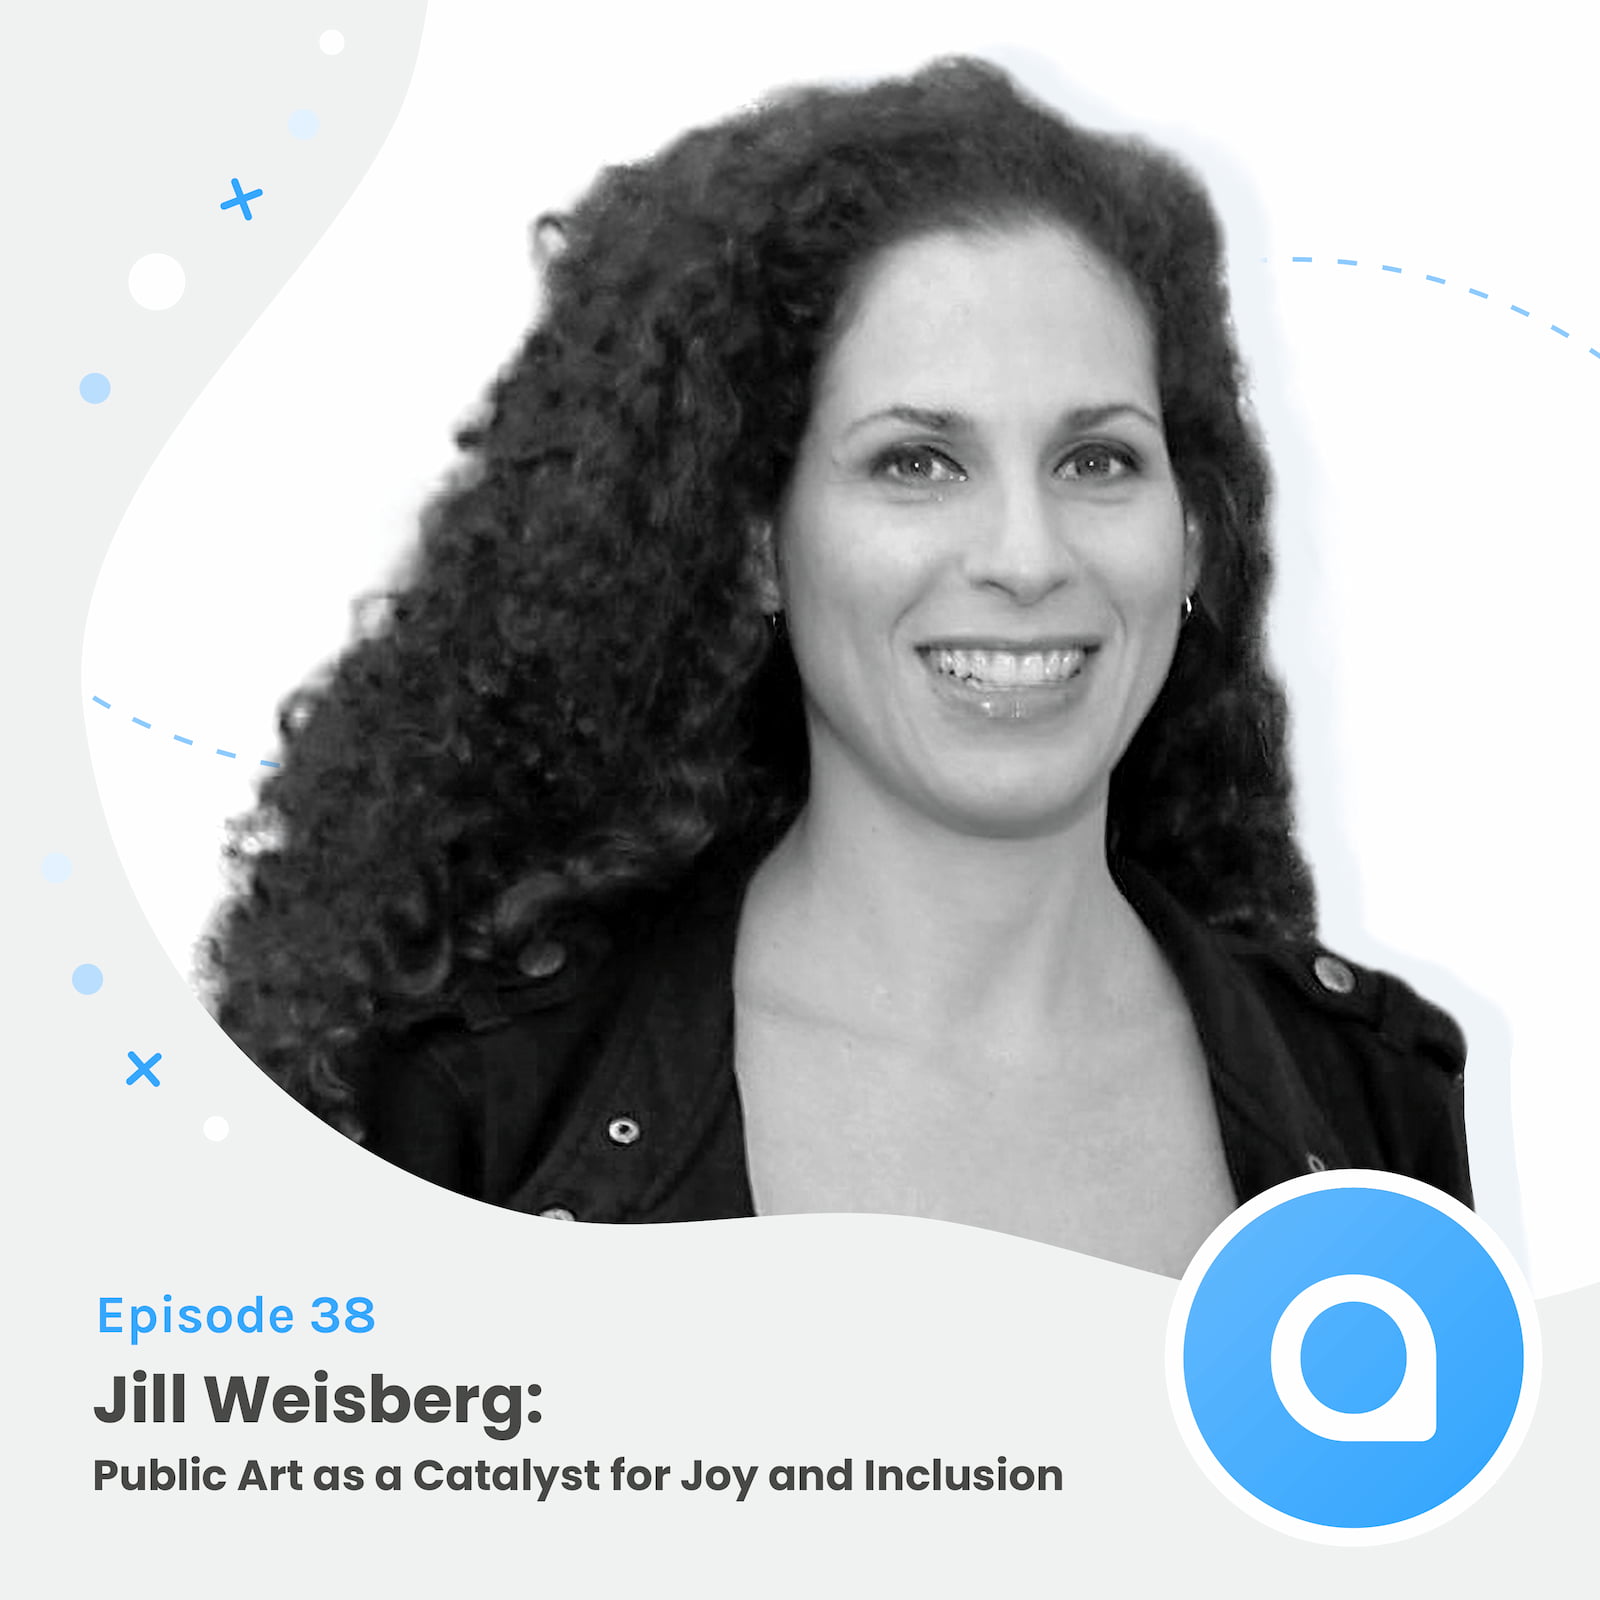 Jill Weisberg: Public Art as a Catalyst for Joy and Inclusion